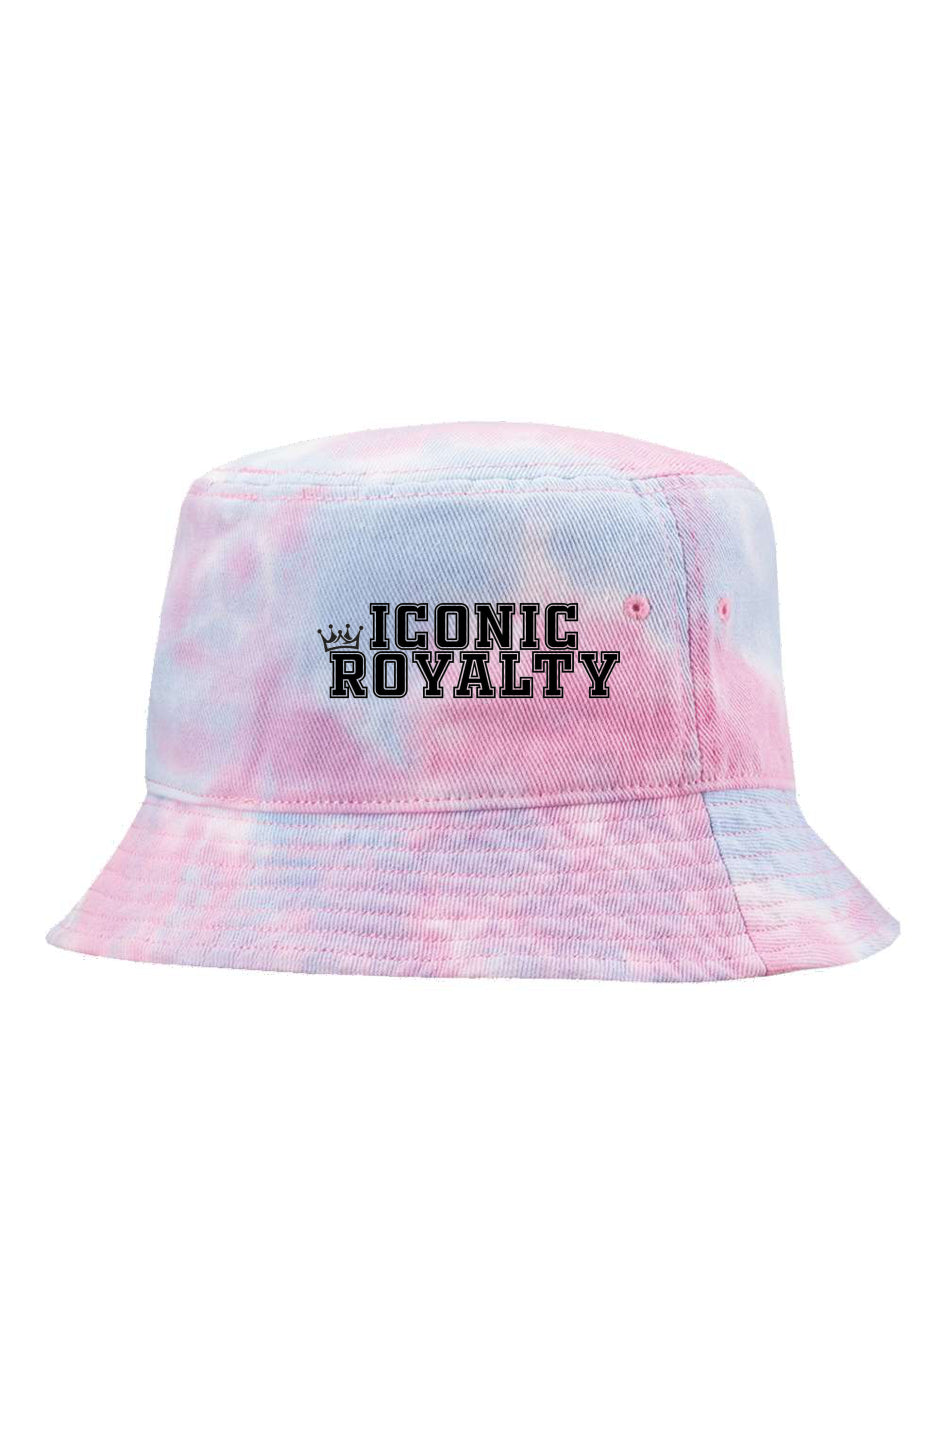 Iconic Royalty Cotton Candy Tie-Dye Bucket Cap